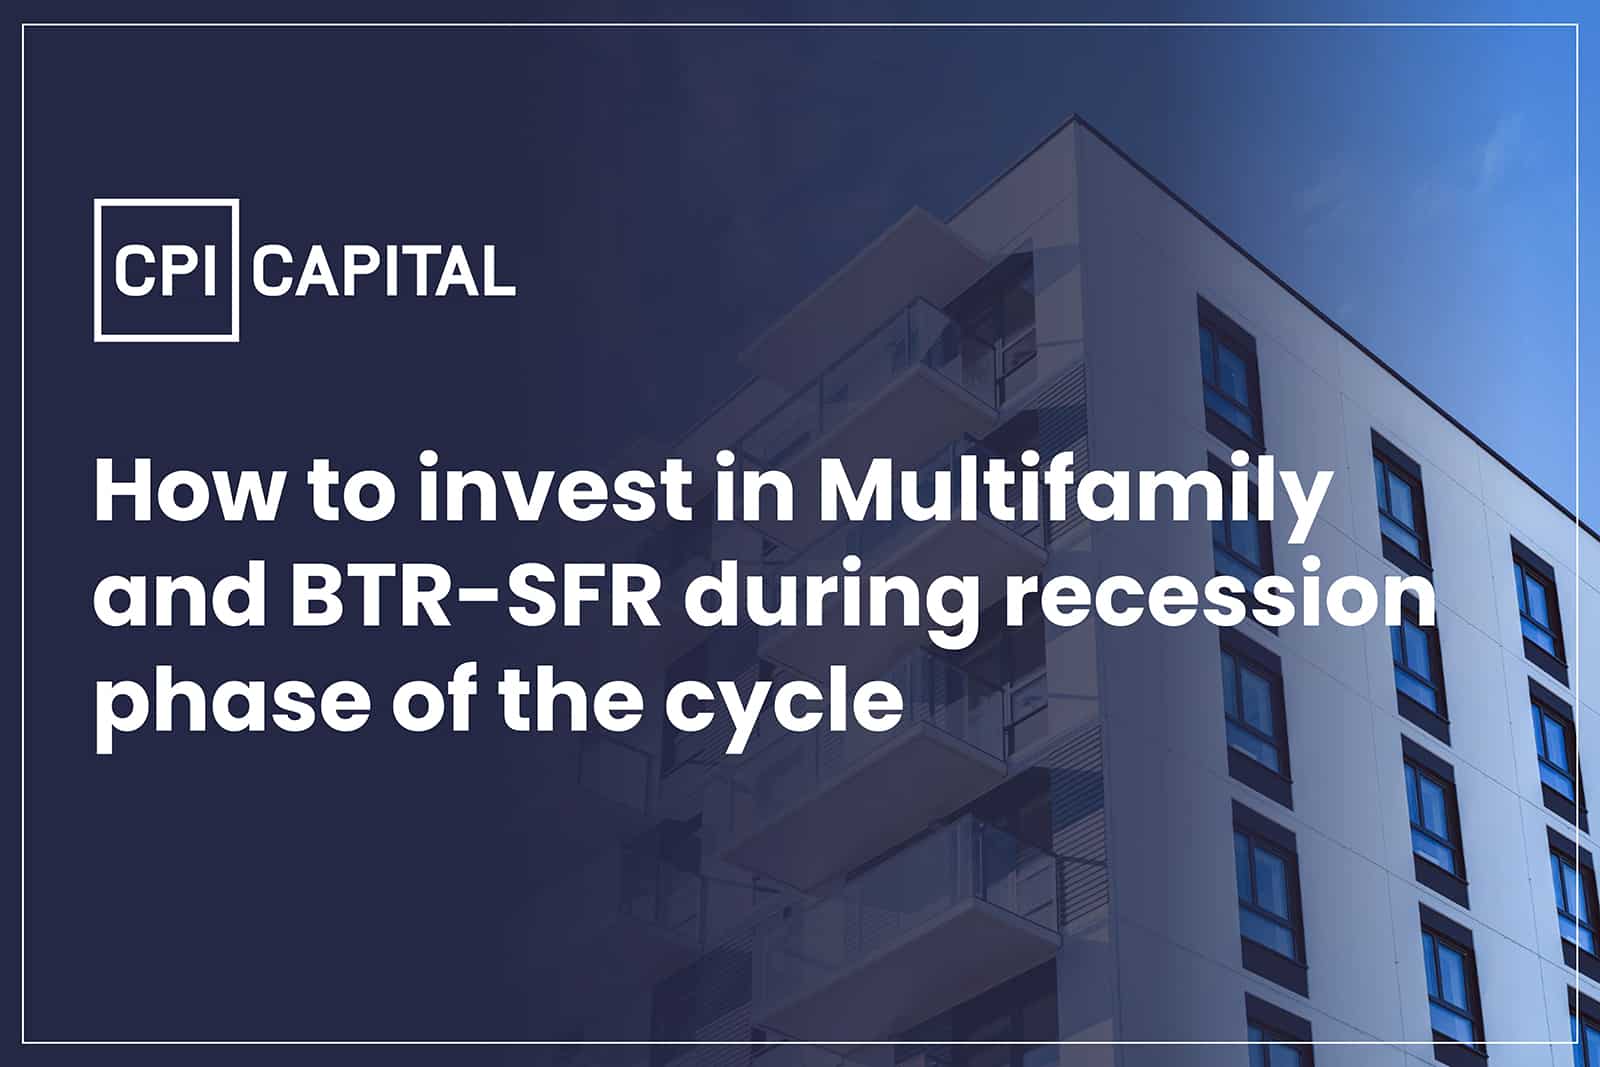 How to invest in multi-family and BTR-SFR in the recession phase of the cycle